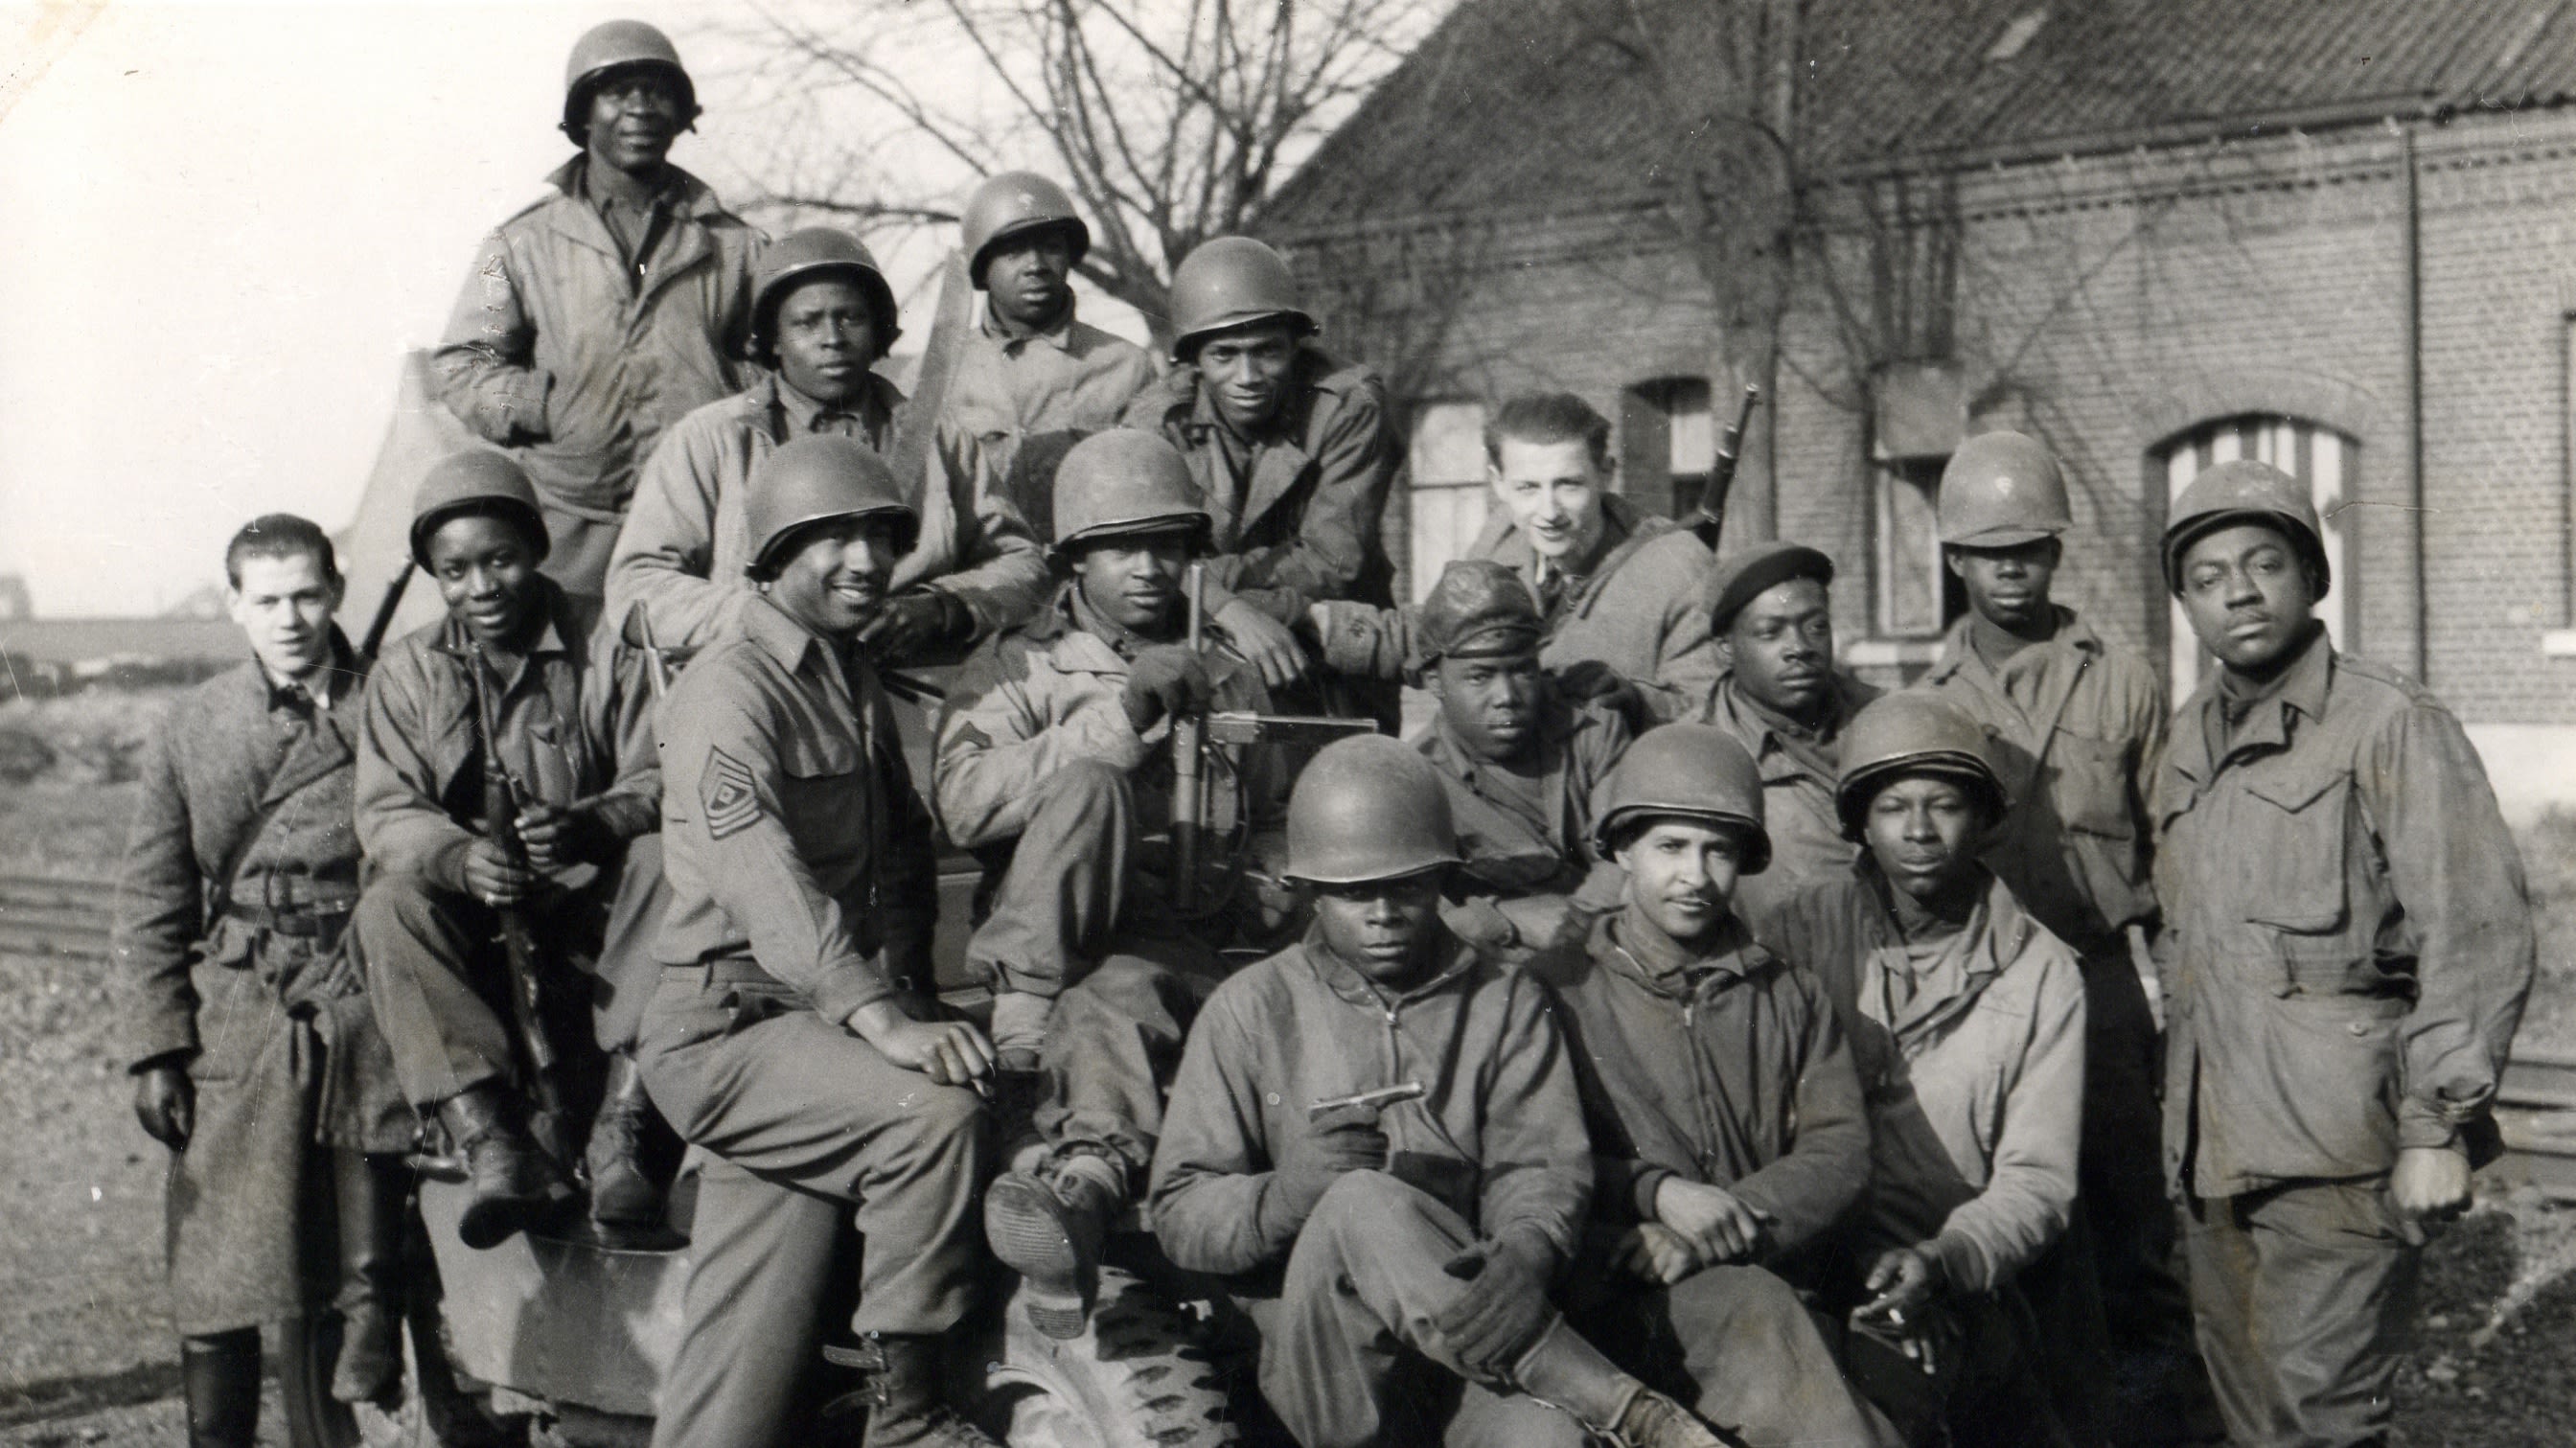 black and white photograph, a group of African American soldiers along with two white men.